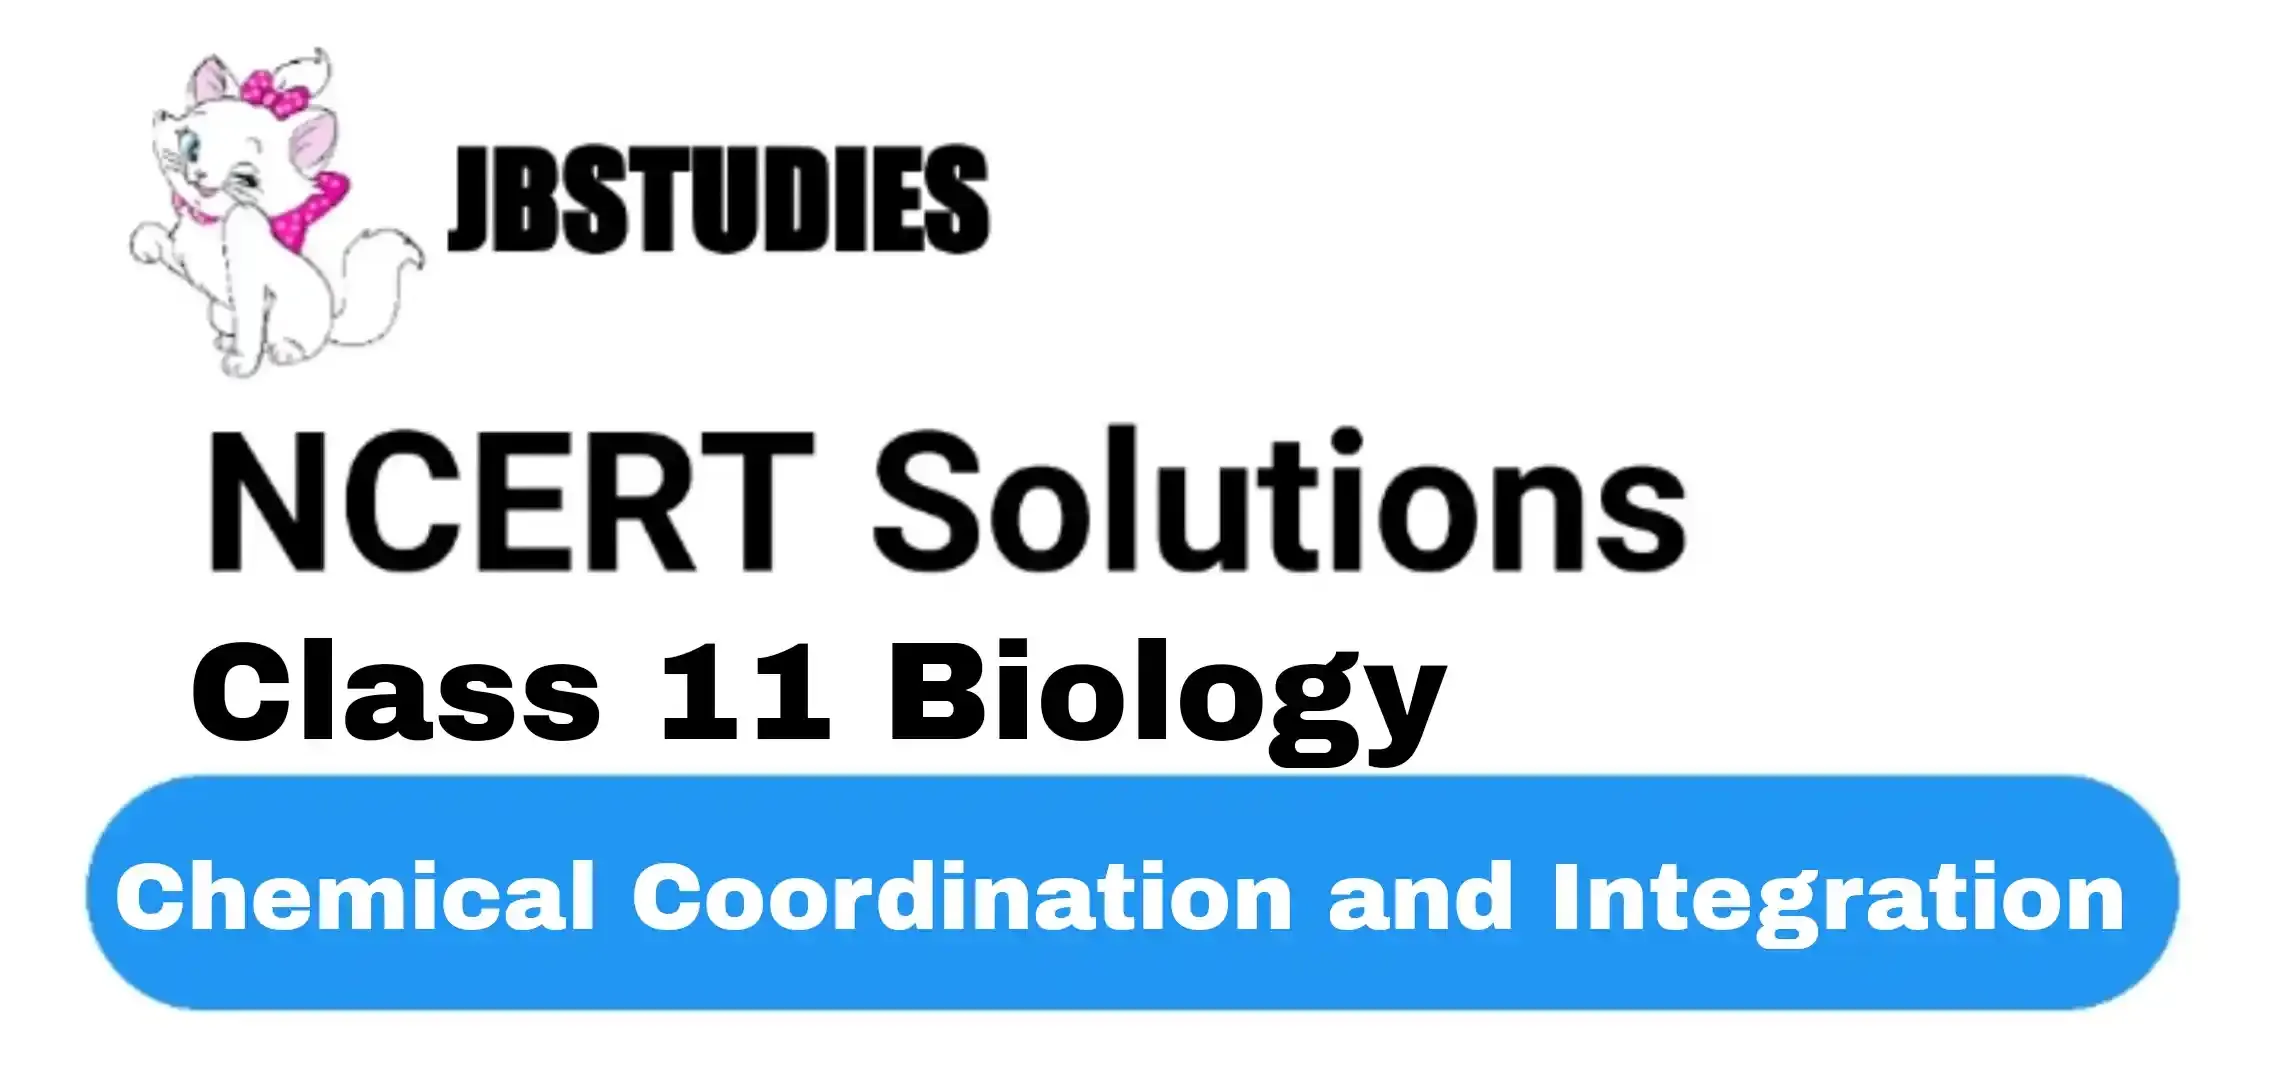 Solutions Class 11 Biology Chapter -22 (Chemical Coordination and Integration)